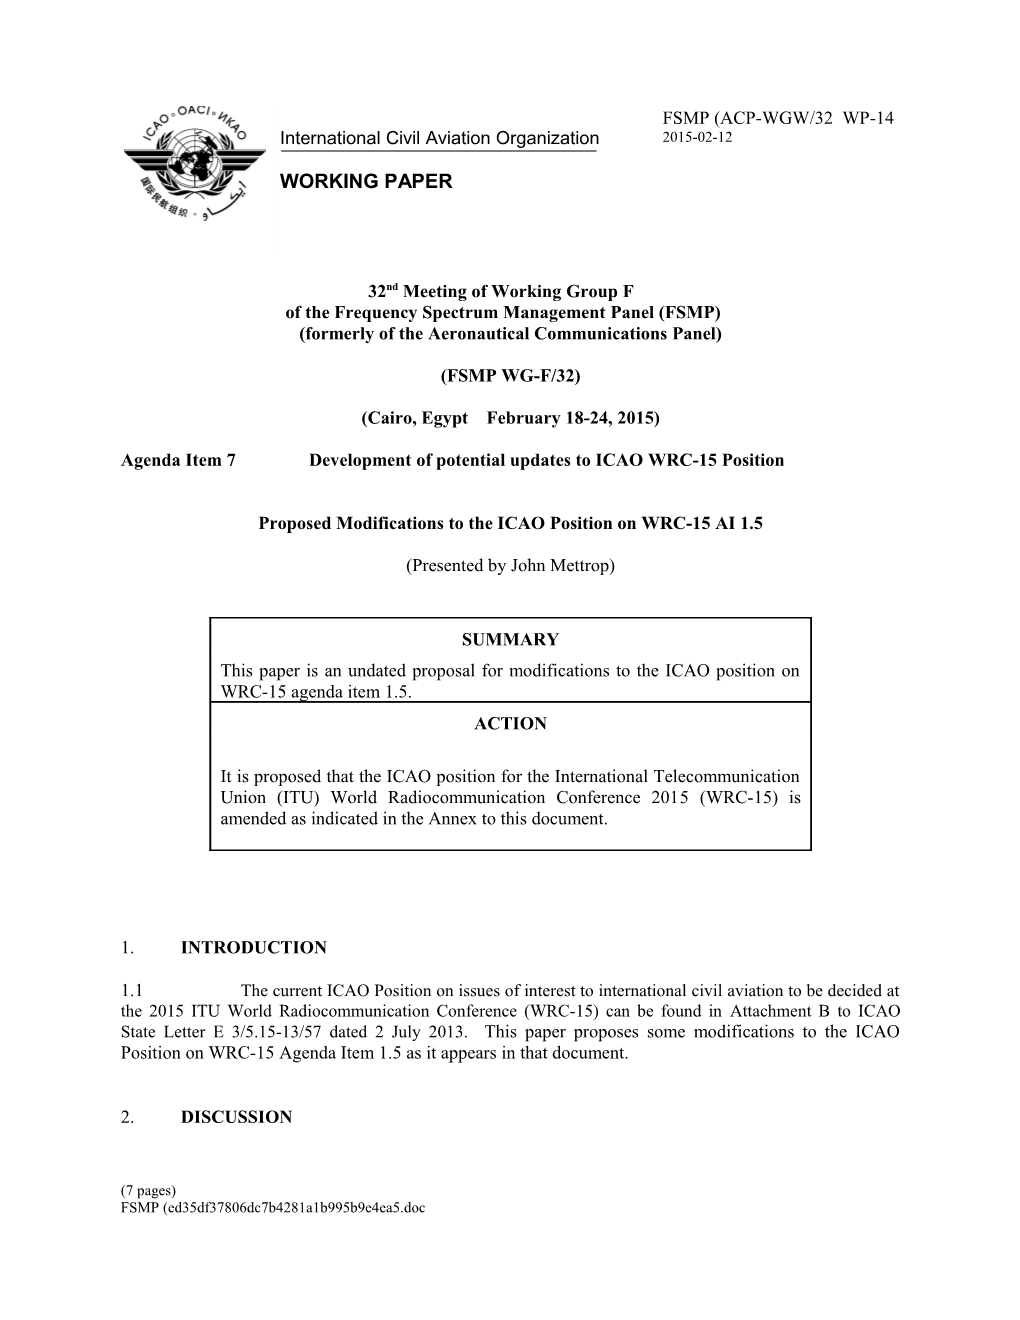 Proposed Modifications to the ICAO Position on WRC-15 AI 1.5